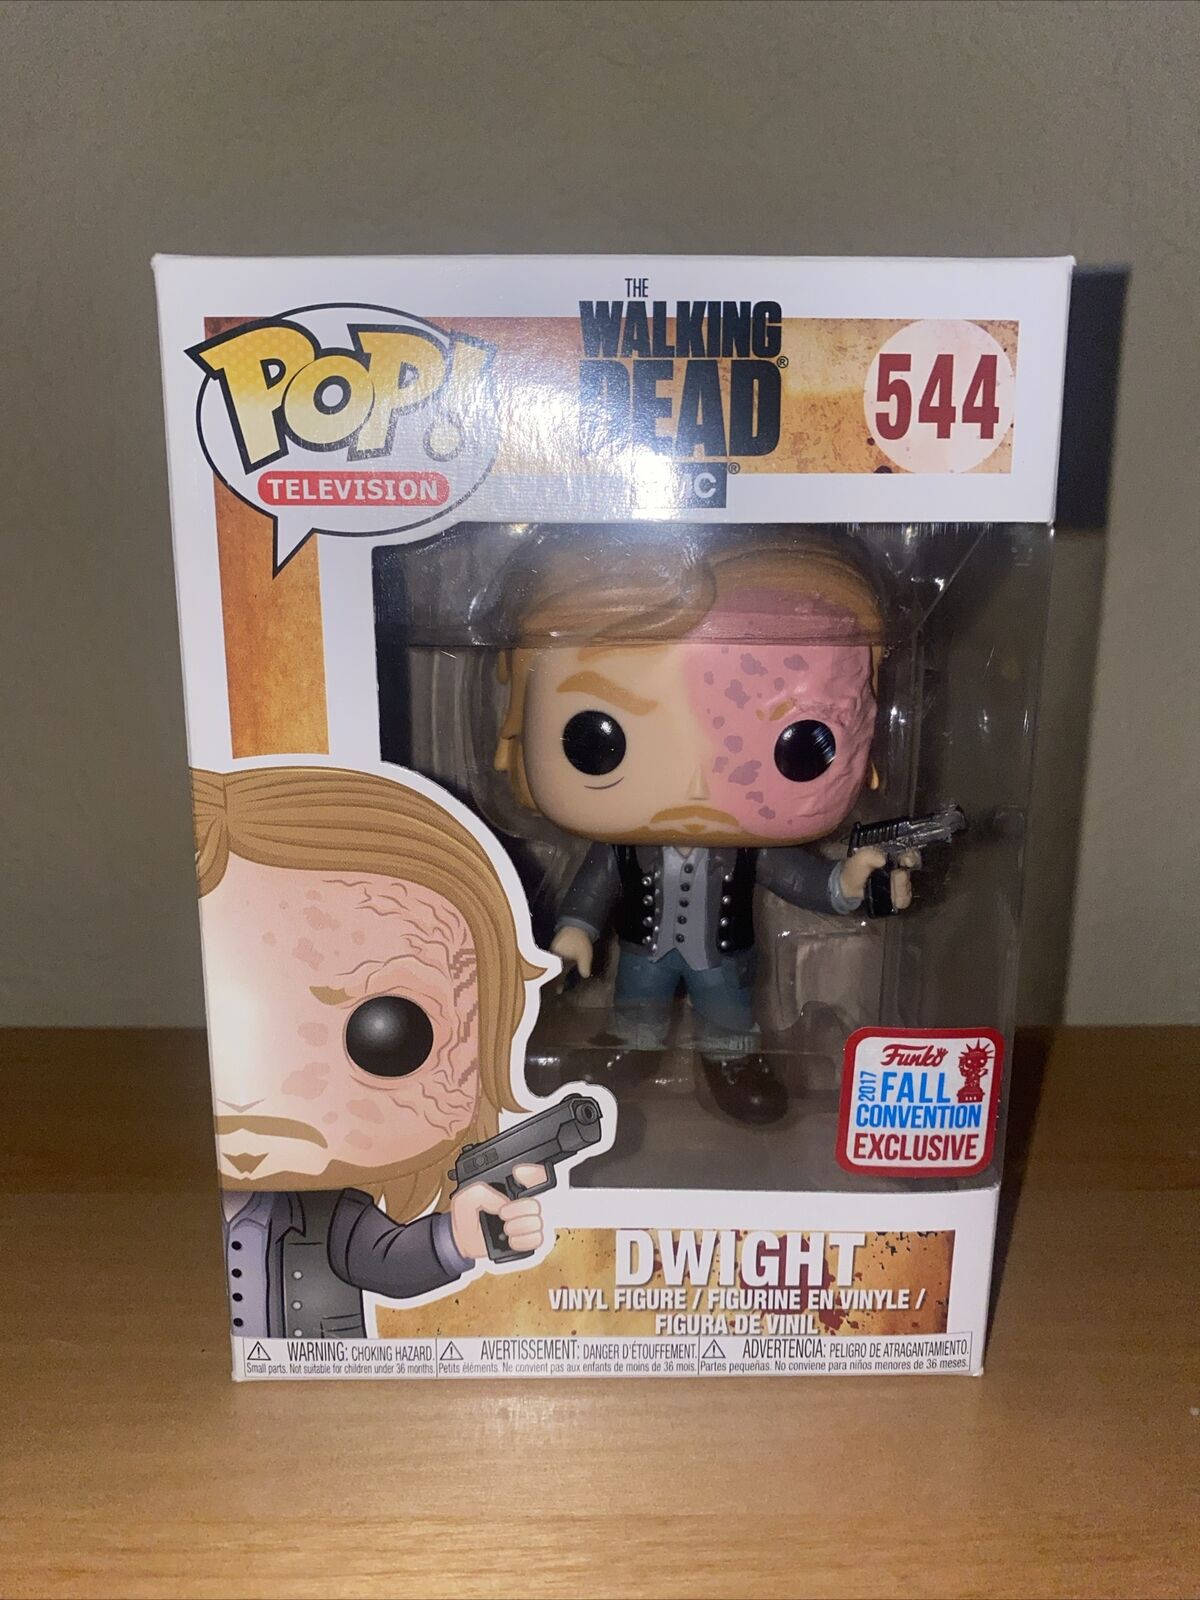 The Walking Dead Dwight 544 NYCC 2017 Convention Exclusive Funko Pop